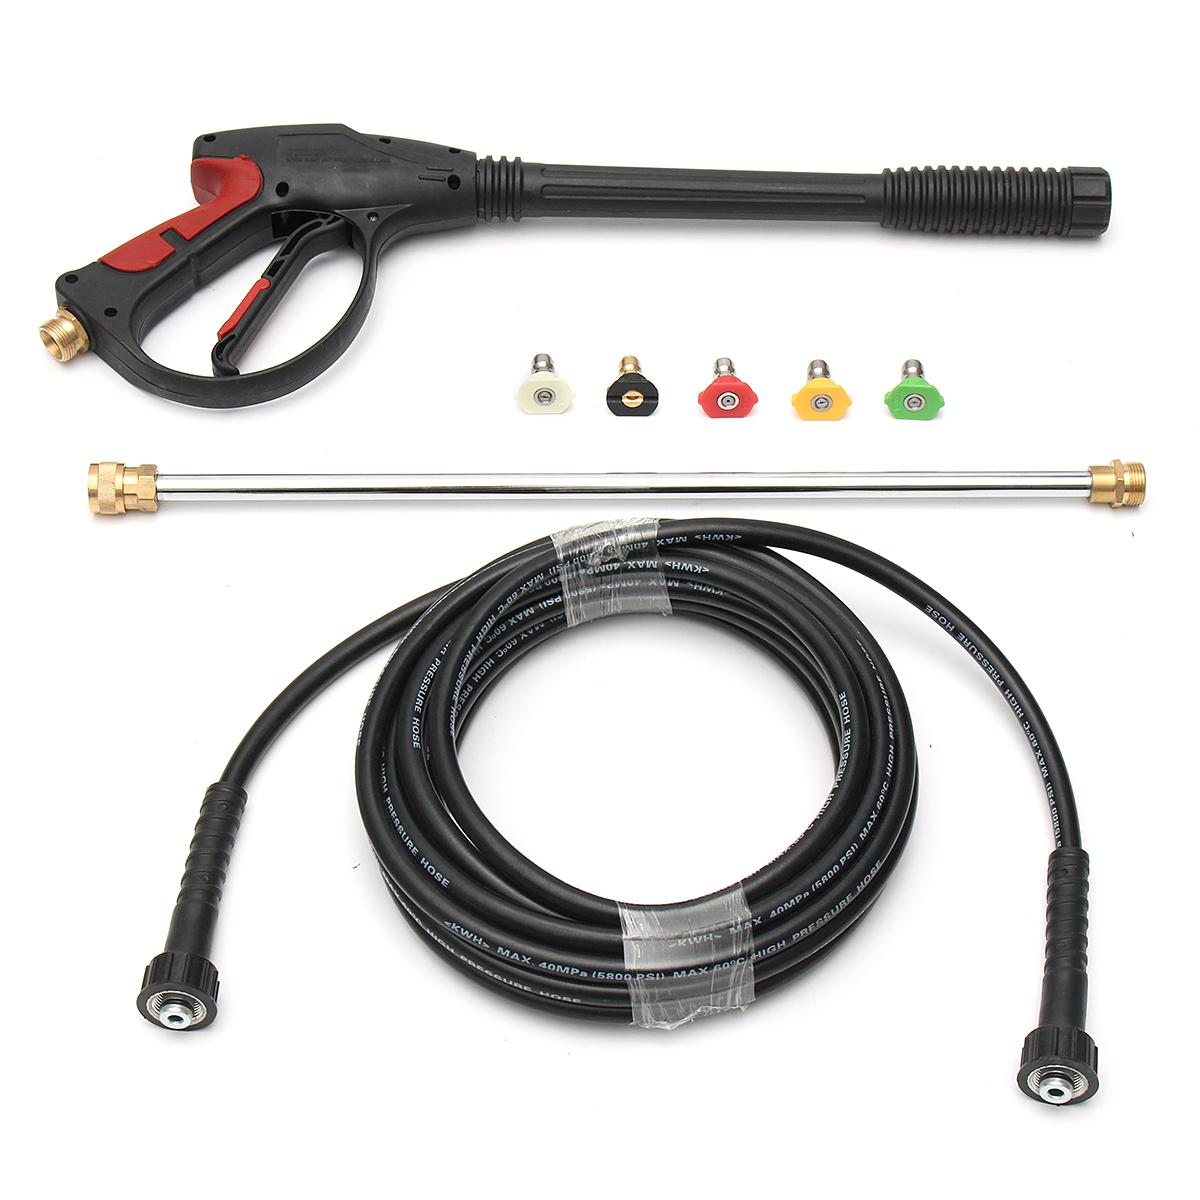 4000 PSI High Pressure Washer Gun Lance / 8M Pipe /Wand Kit for Car Cleaning